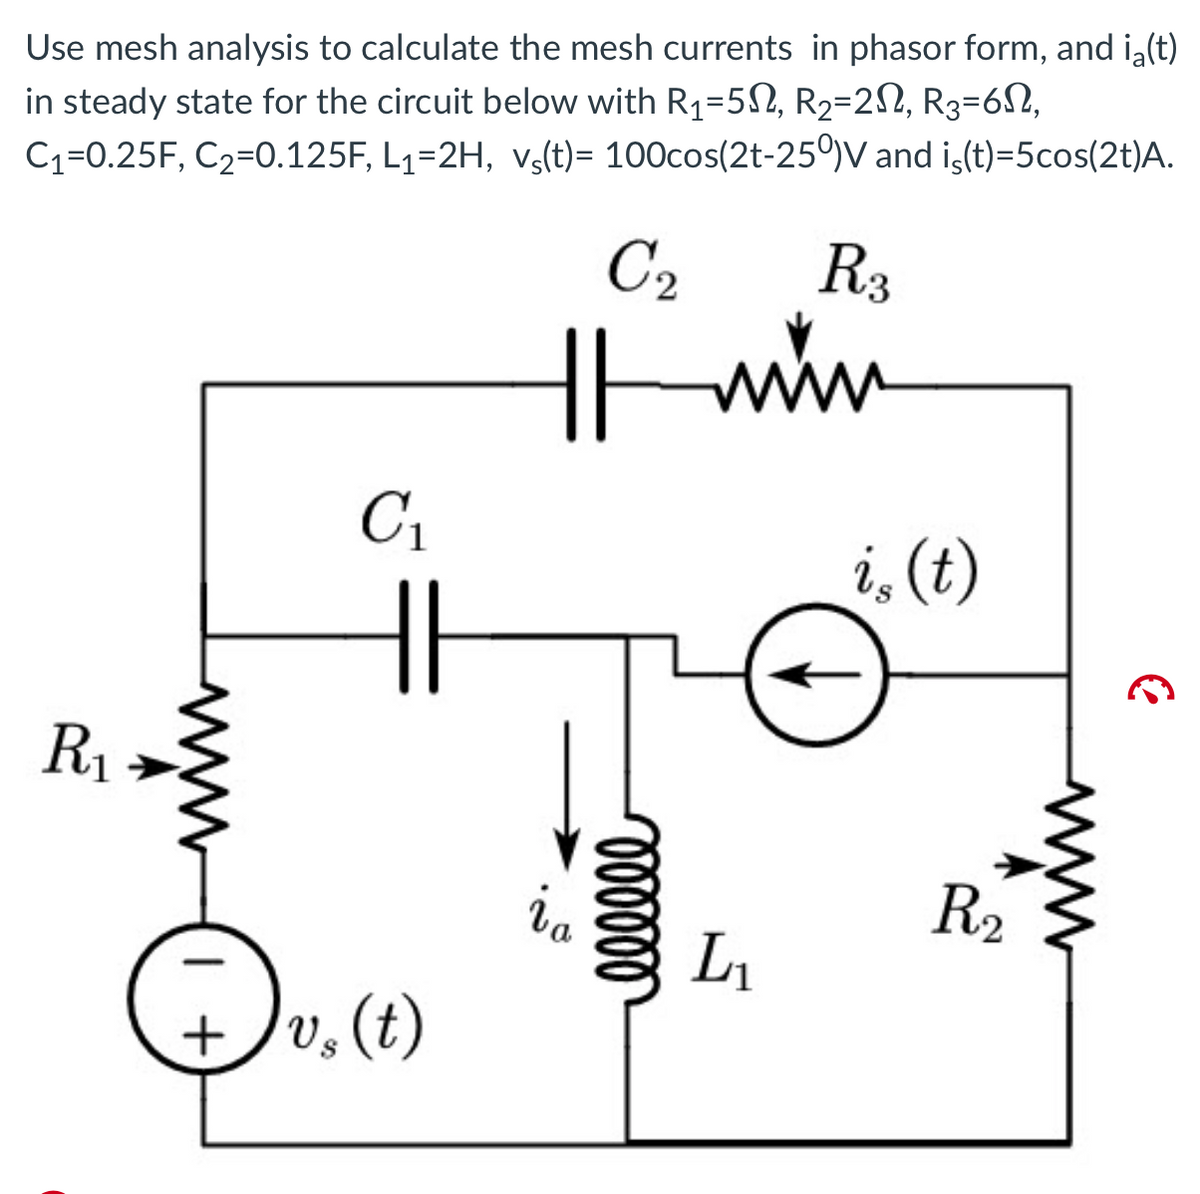 Use mesh analysis to calculate the mesh currents in phasor form, and i(t)
in steady state for the circuit below with R₁-502, R₂=2, R3-6,
C₁=0.25F, C₂-0.125F, L₁=2H, vs(t)= 100cos(2t-250)V and iç(t)=5cos(2t)A.
R₁
C₁
+v₂ (t)
C₂
R3
11 min
www
ia
oooooo
L₁
i, (t)
R₂
C